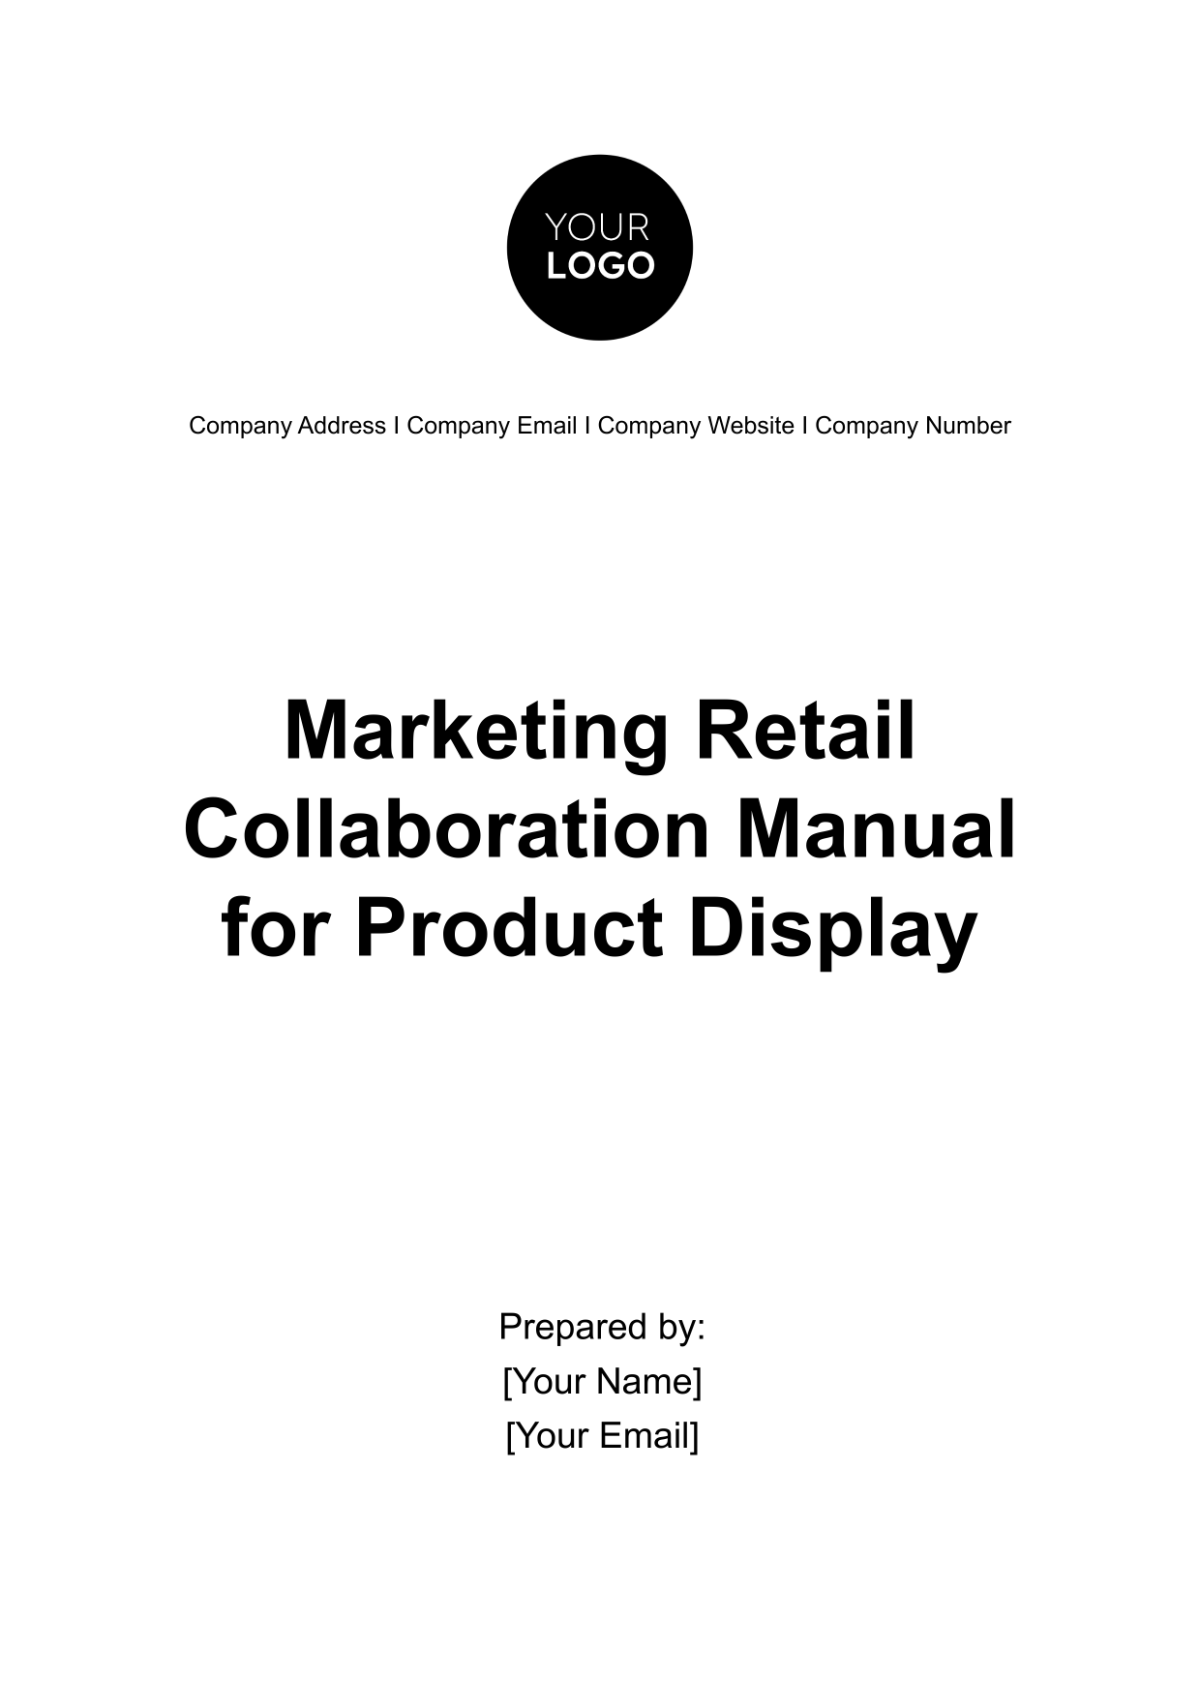 Free Marketing Retailer Collaboration Manual for Product Display Template